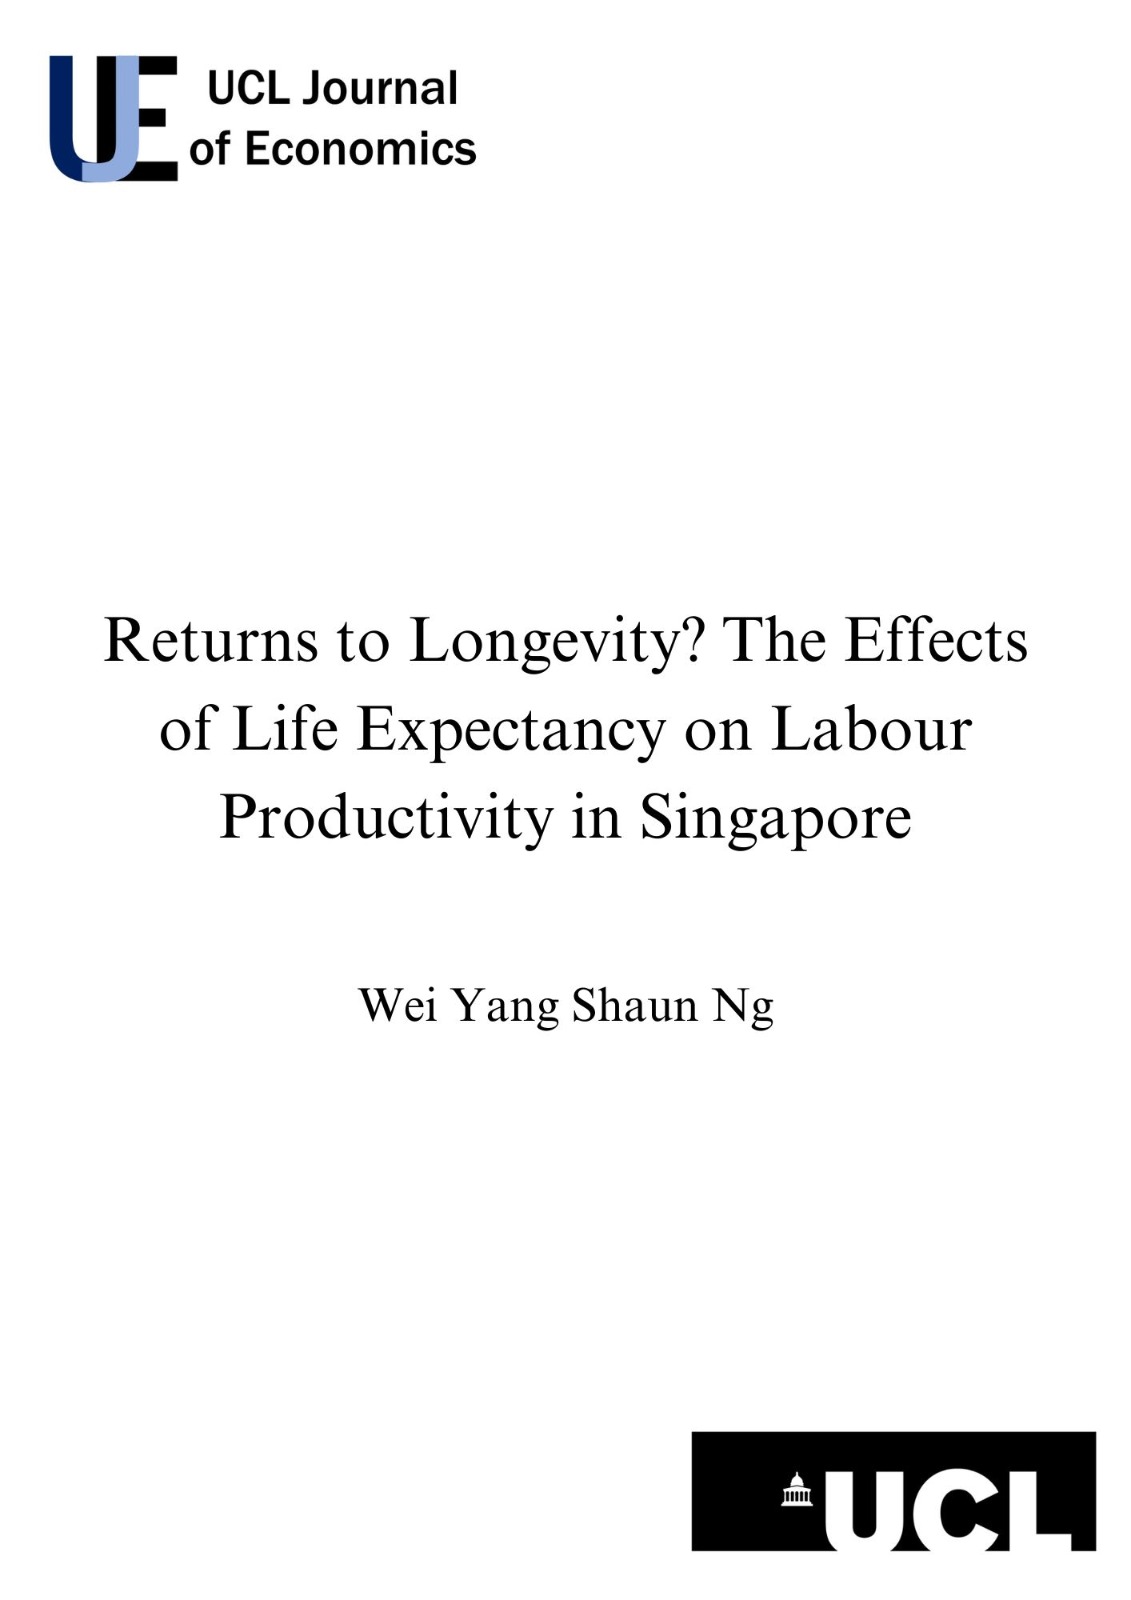 Returns to Longevity? The Effects of Life Expectancy on Labour Productivity in Singapore.